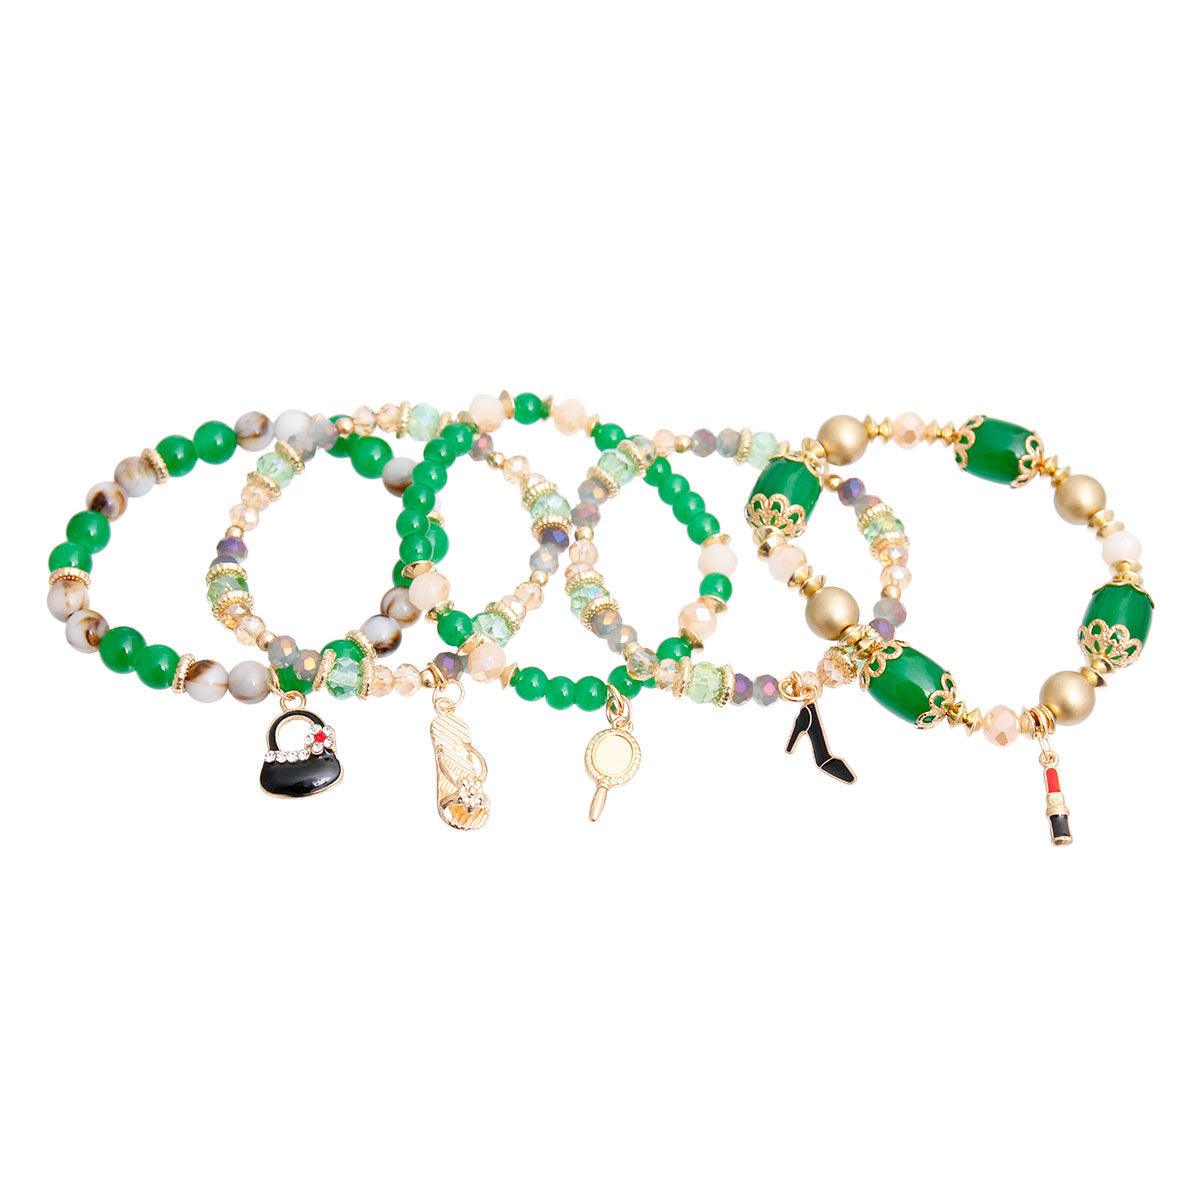 Stylish Green Bead Fashion Charm Bracelets - Add Color to Your Outfit